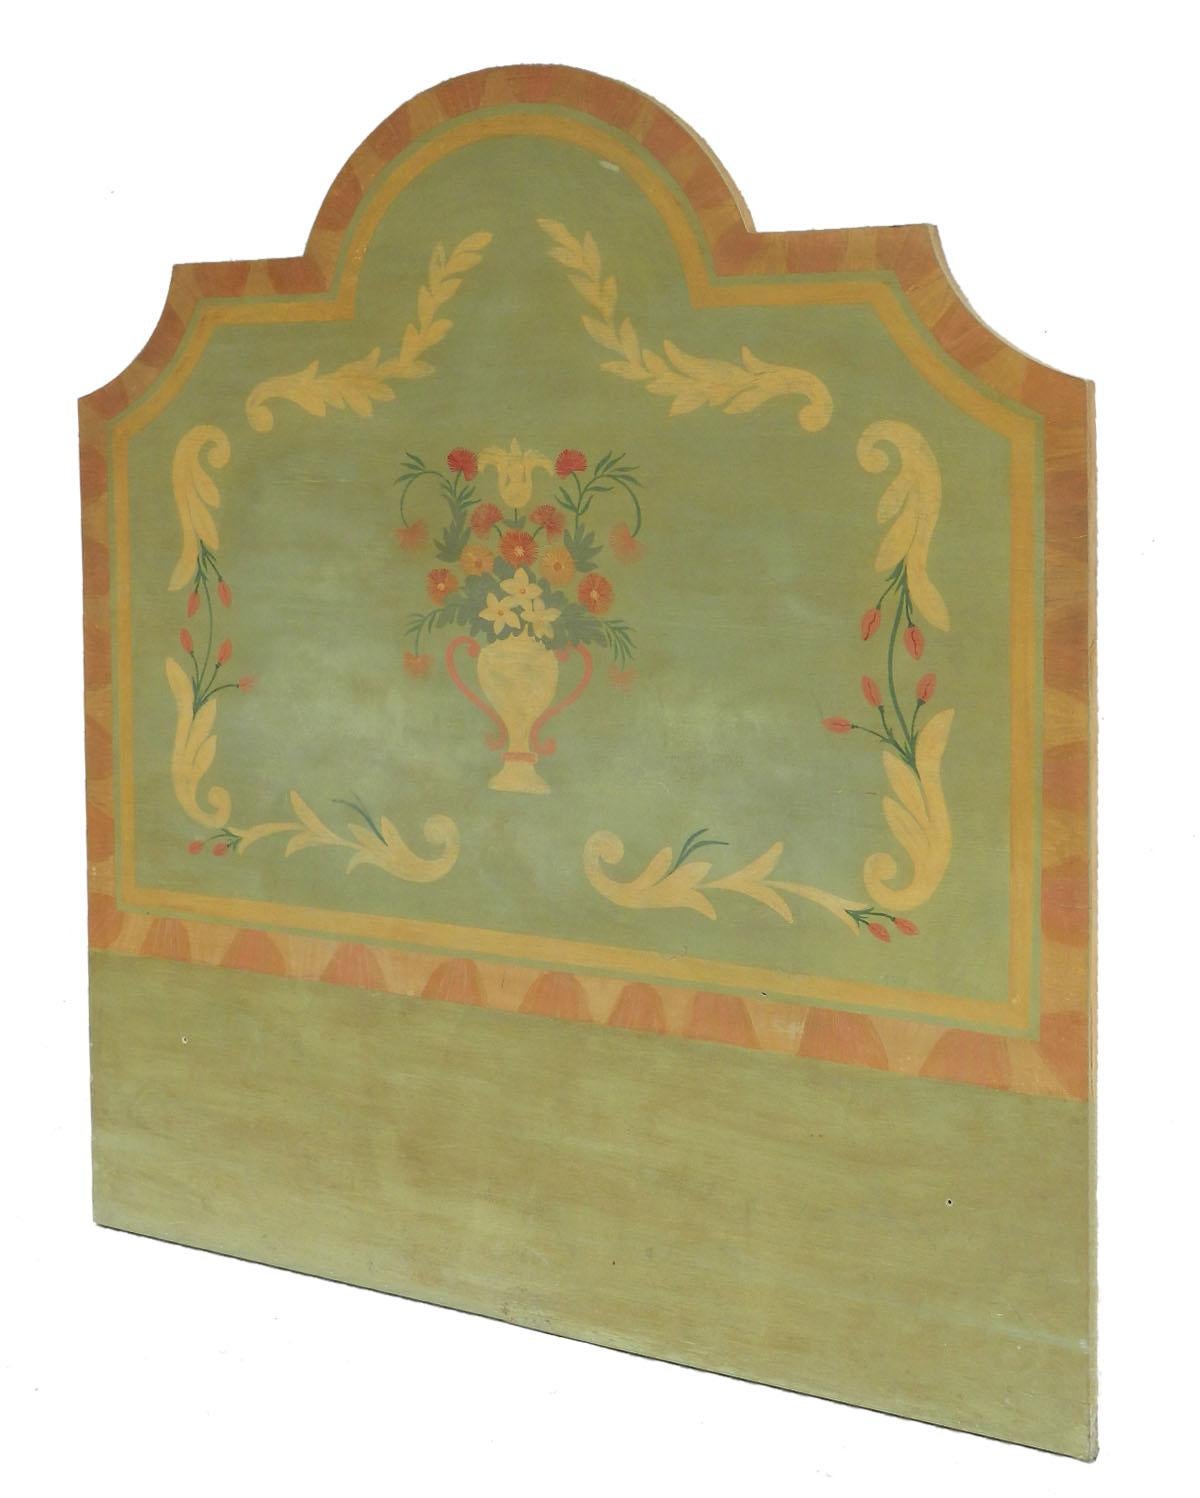 Painted Bed Headboard by Lepetz Trompe L'oeil, 20th Century Painting One of a Kind